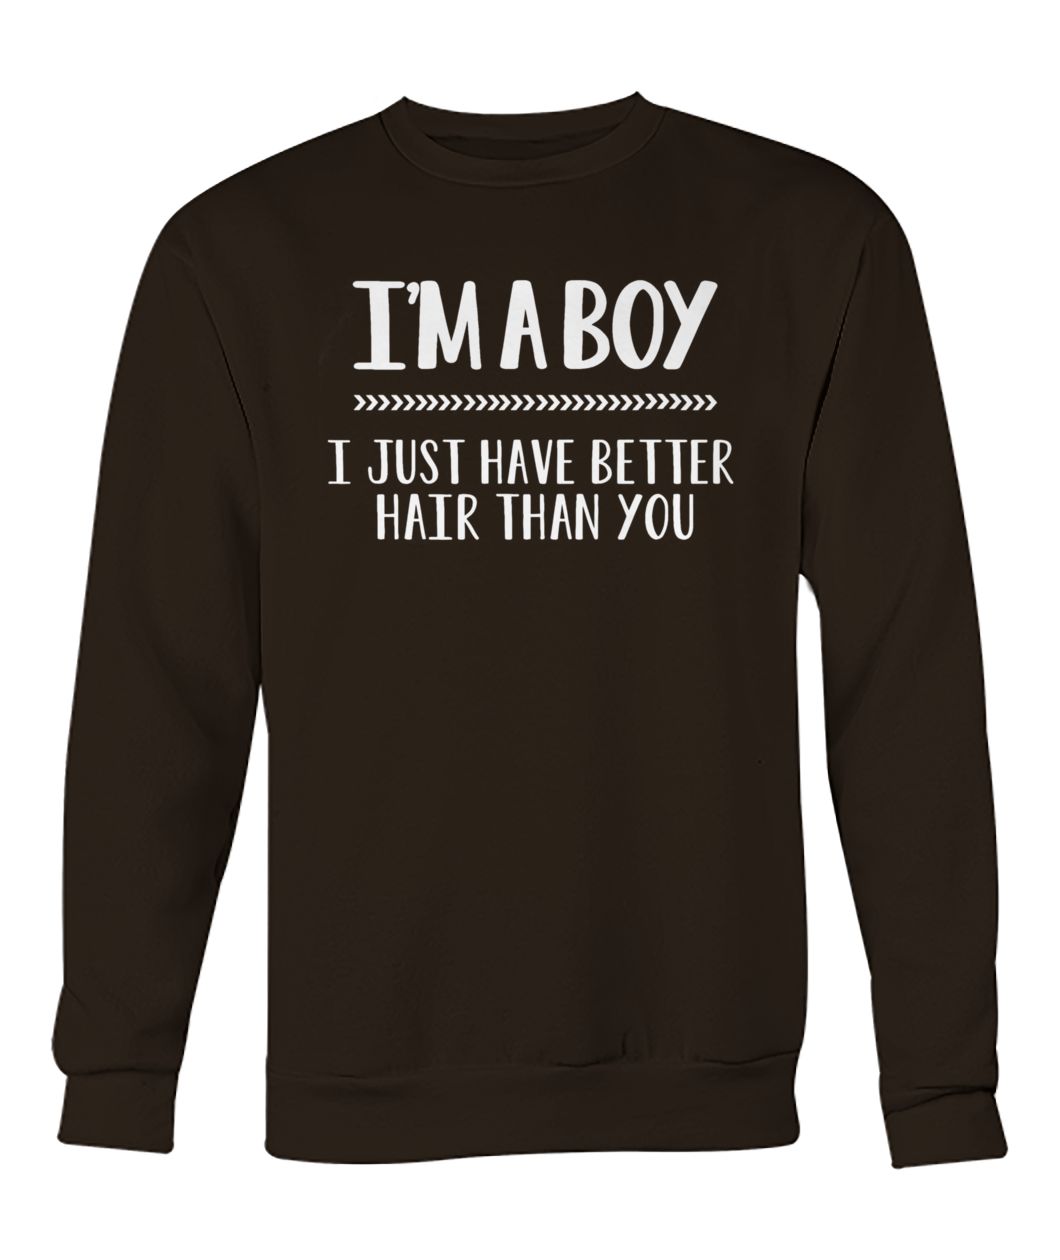 I'm a boy I just have better hair than you crew neck sweatshirt